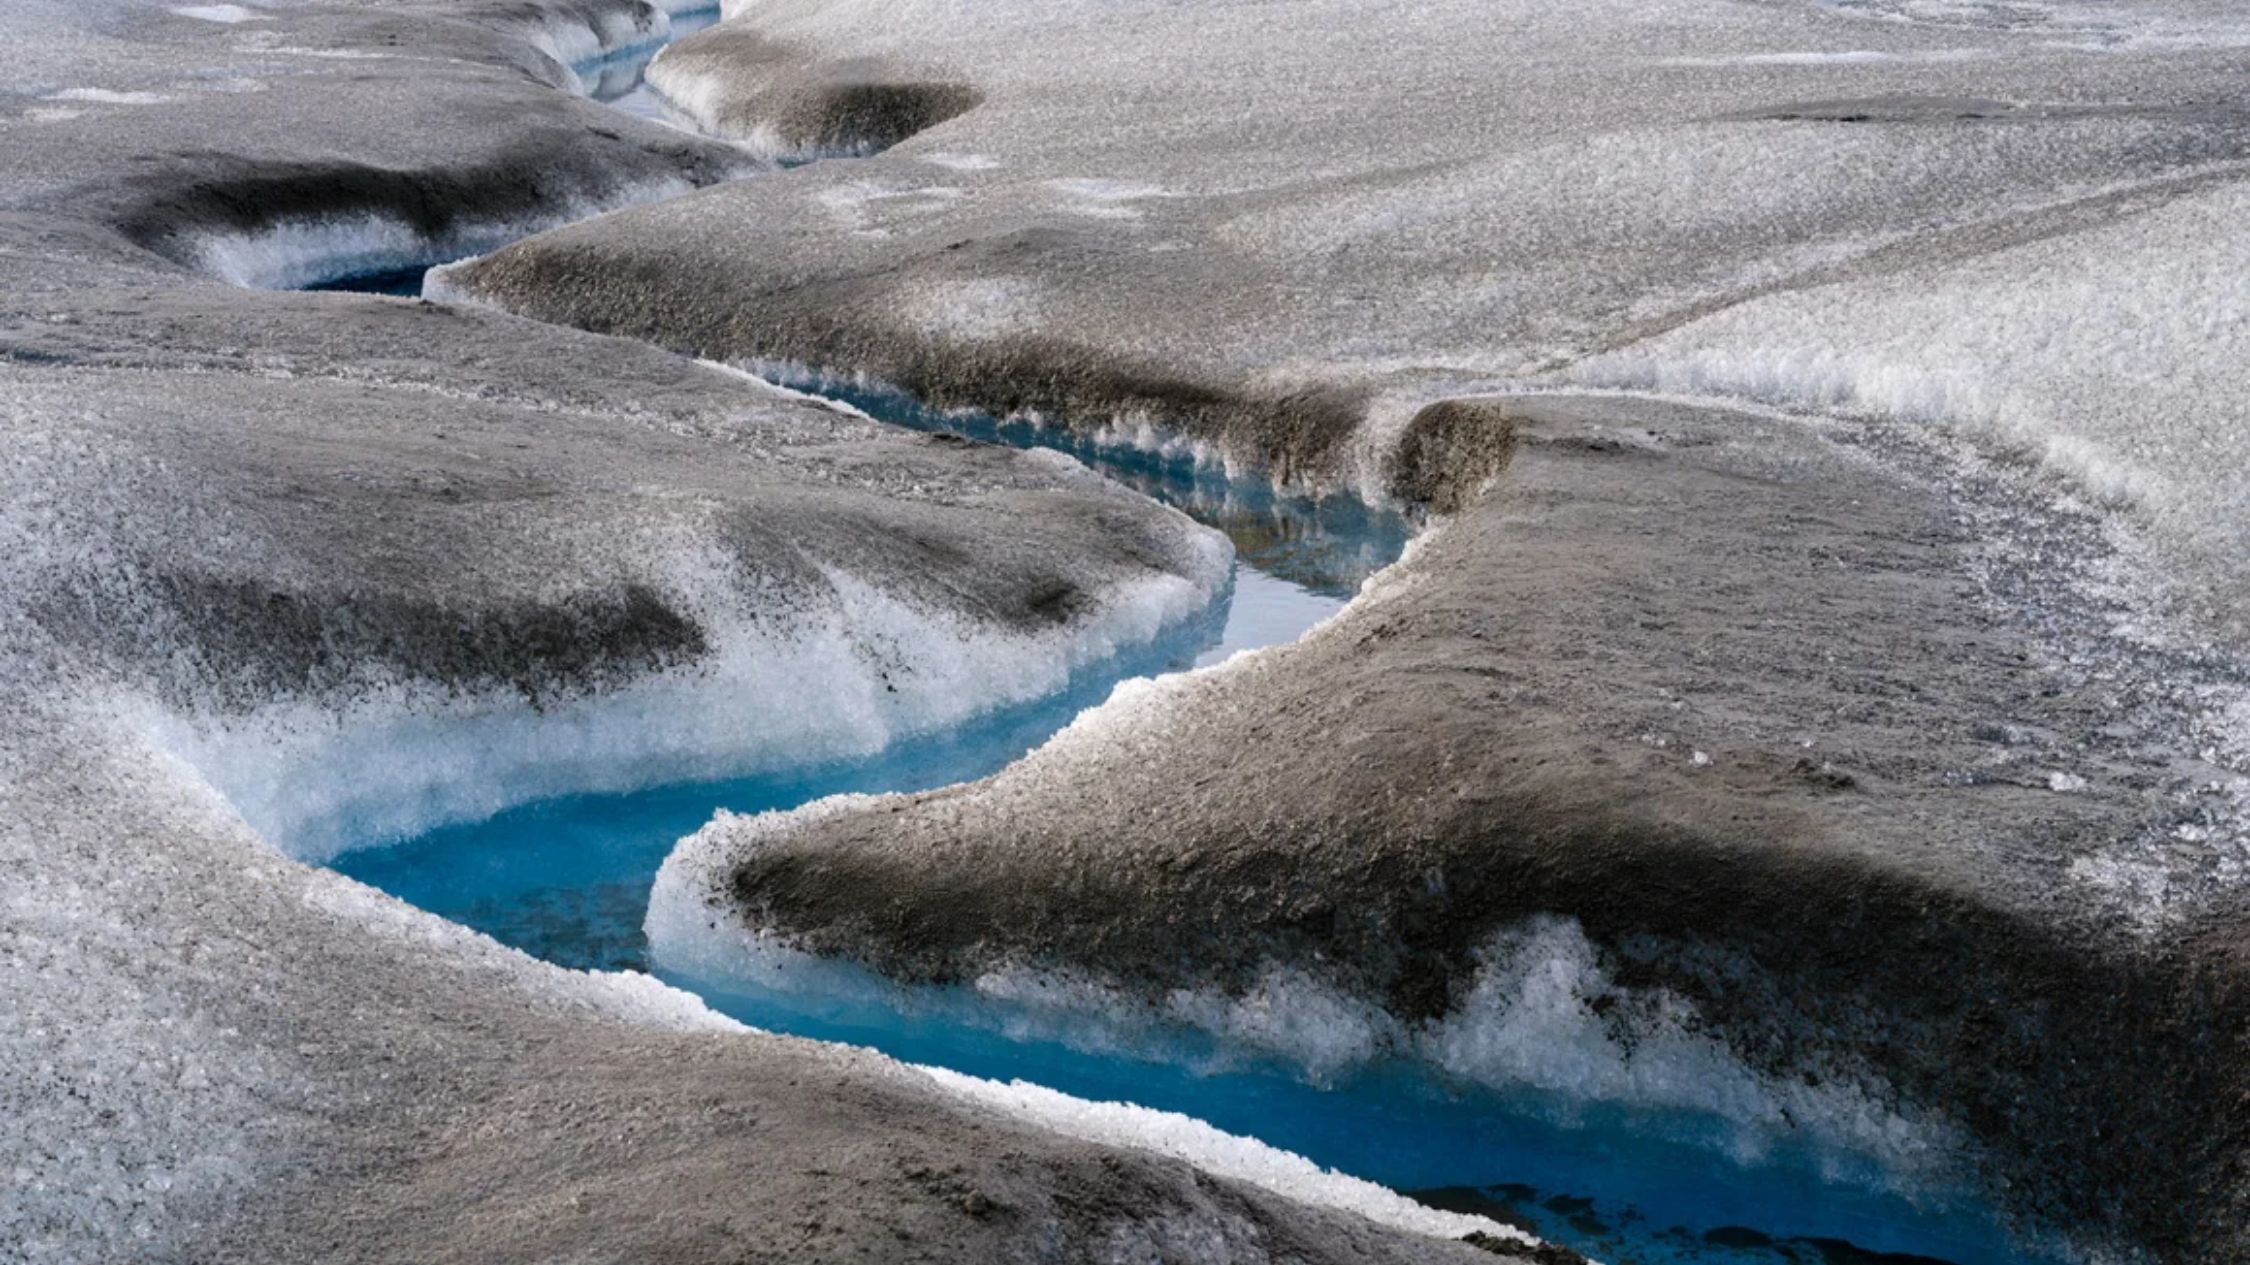 Brown sediment on melting ice near Kangerlussuaq in Greenland.  The rapid melting of the ice is having many effects on Greenland's landscape, including sedimentation of its waters.  (Credit: Martin Zwick/REDA&CO/Universal Images Group/Getty Images)